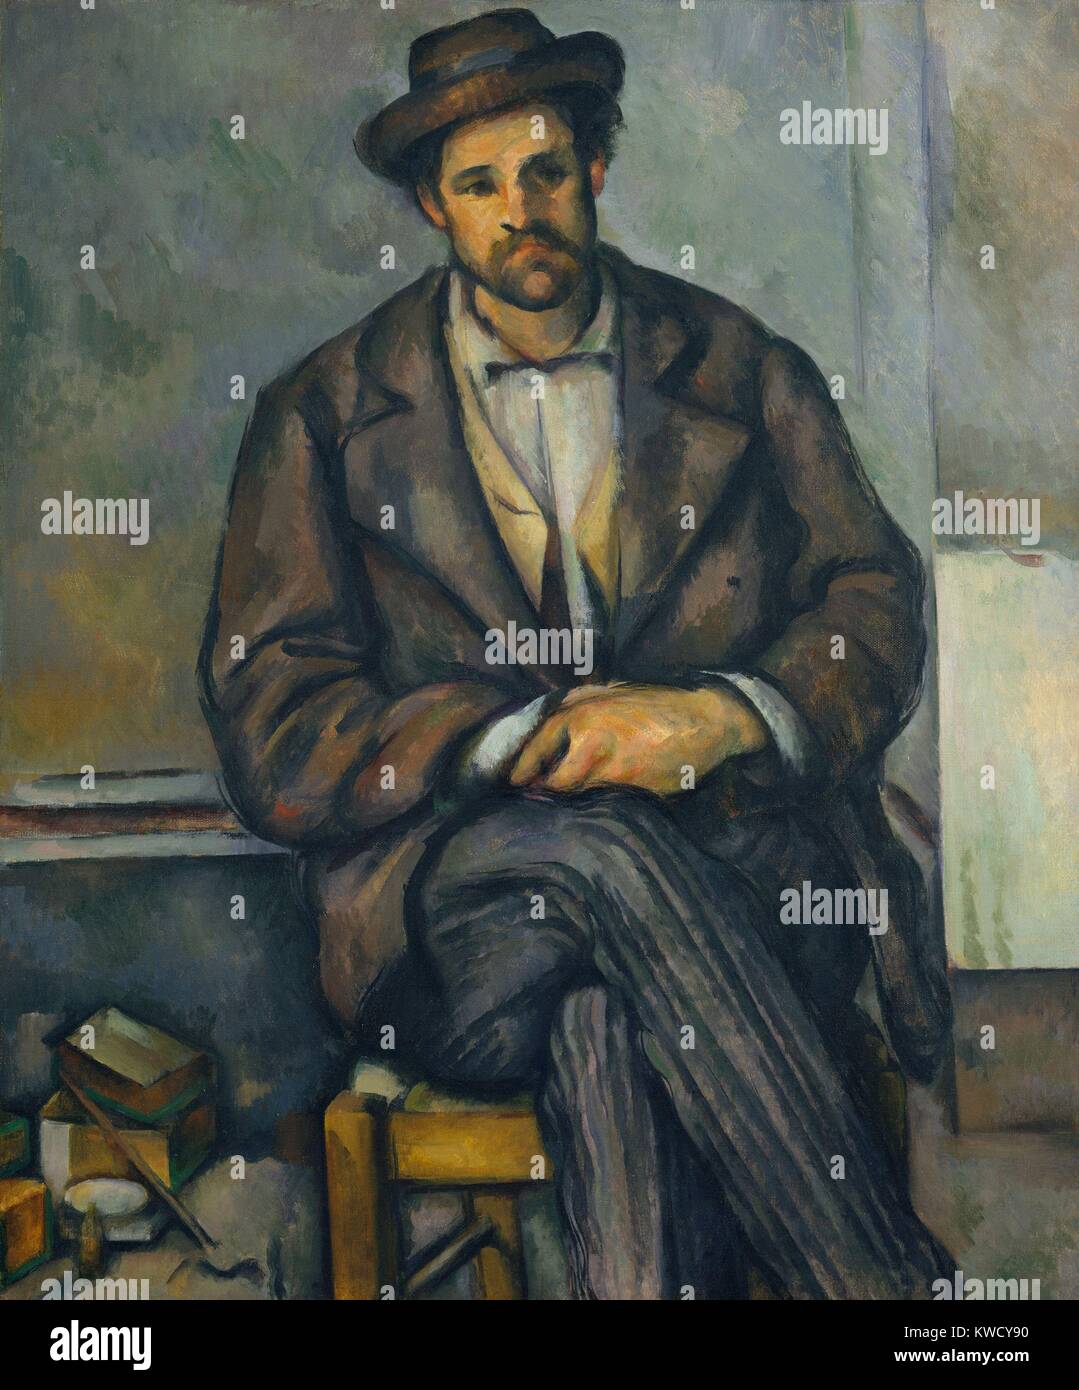 Seated Peasant, by Paul Cezanne, 1892-96, French Post-Impressionist painting, oil on canvas. The sitter is believed to be one of the workers at the Jas de Bouffan, the Cezanne family estate in Aix-en-Provence (BSLOC 2017 5 16) Stock Photo